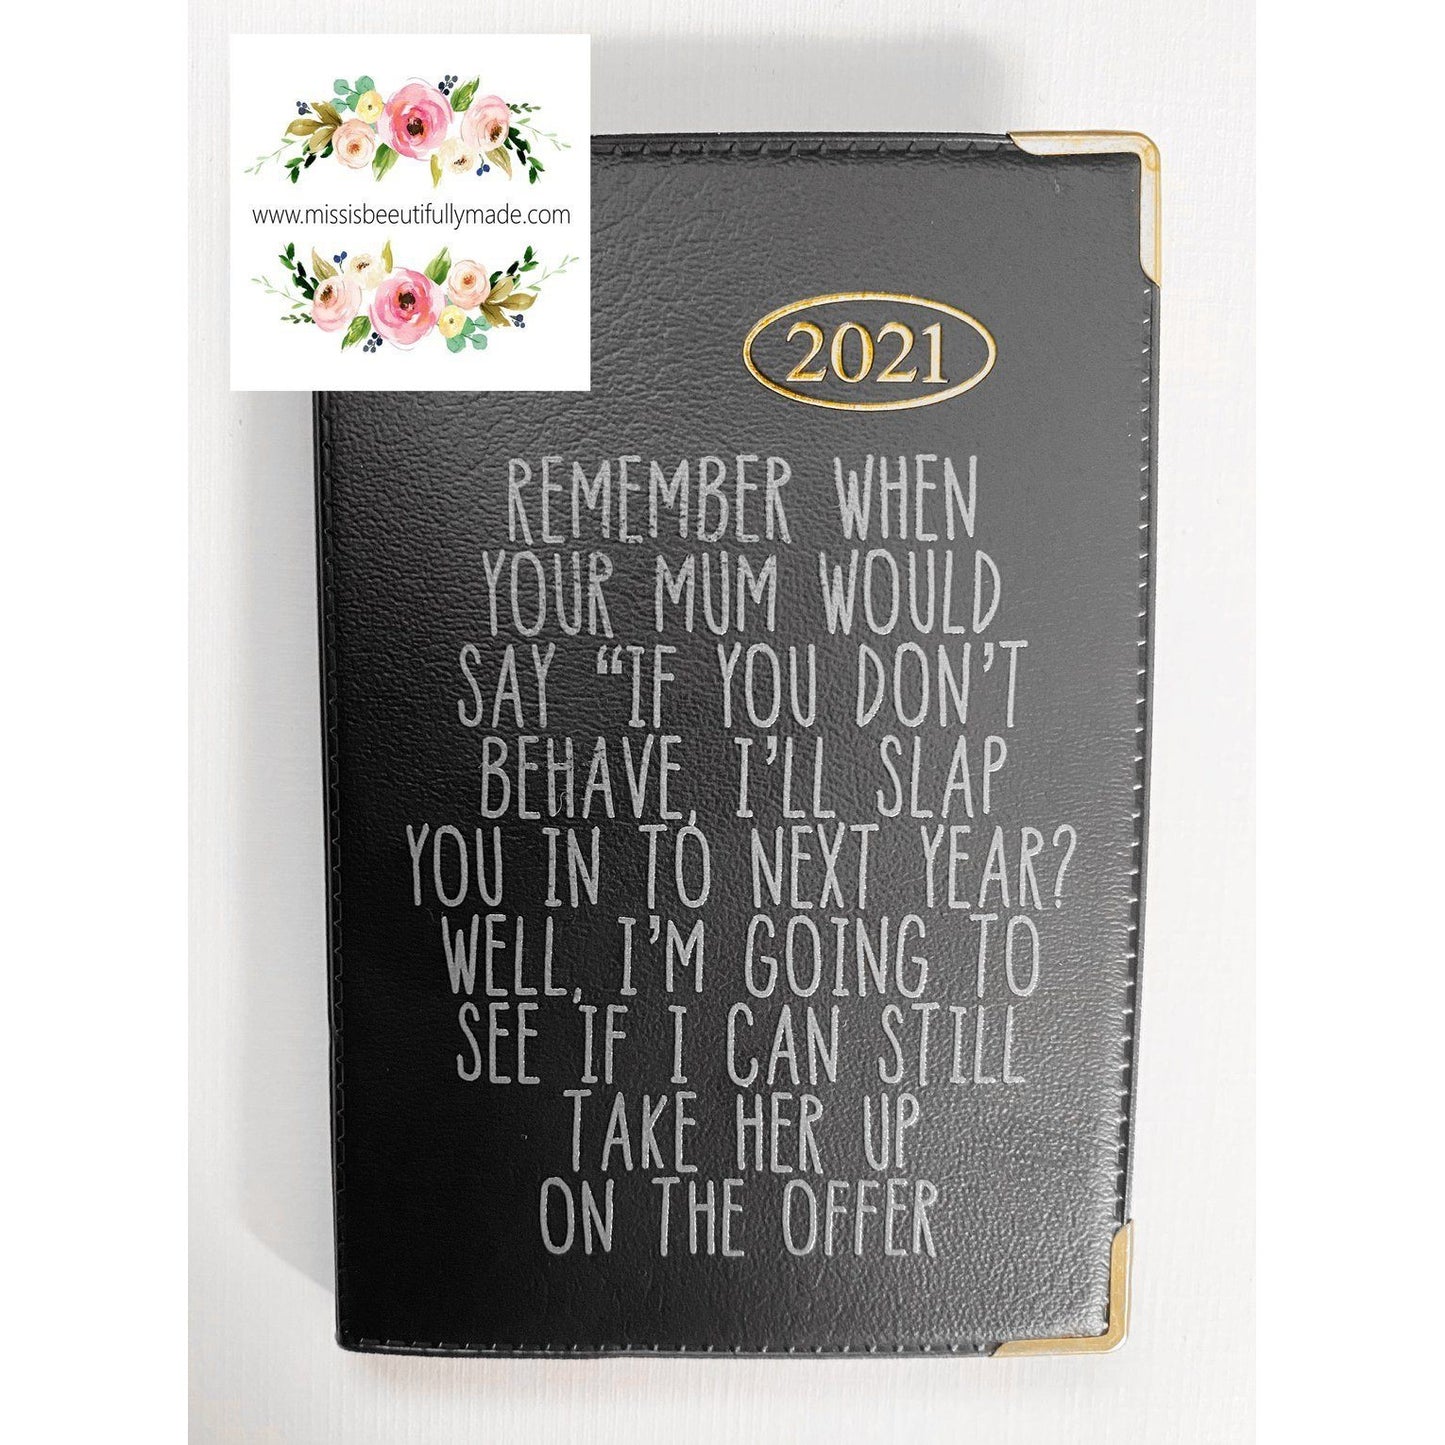 2021 Pocket Diary - Slap You In To Next Year